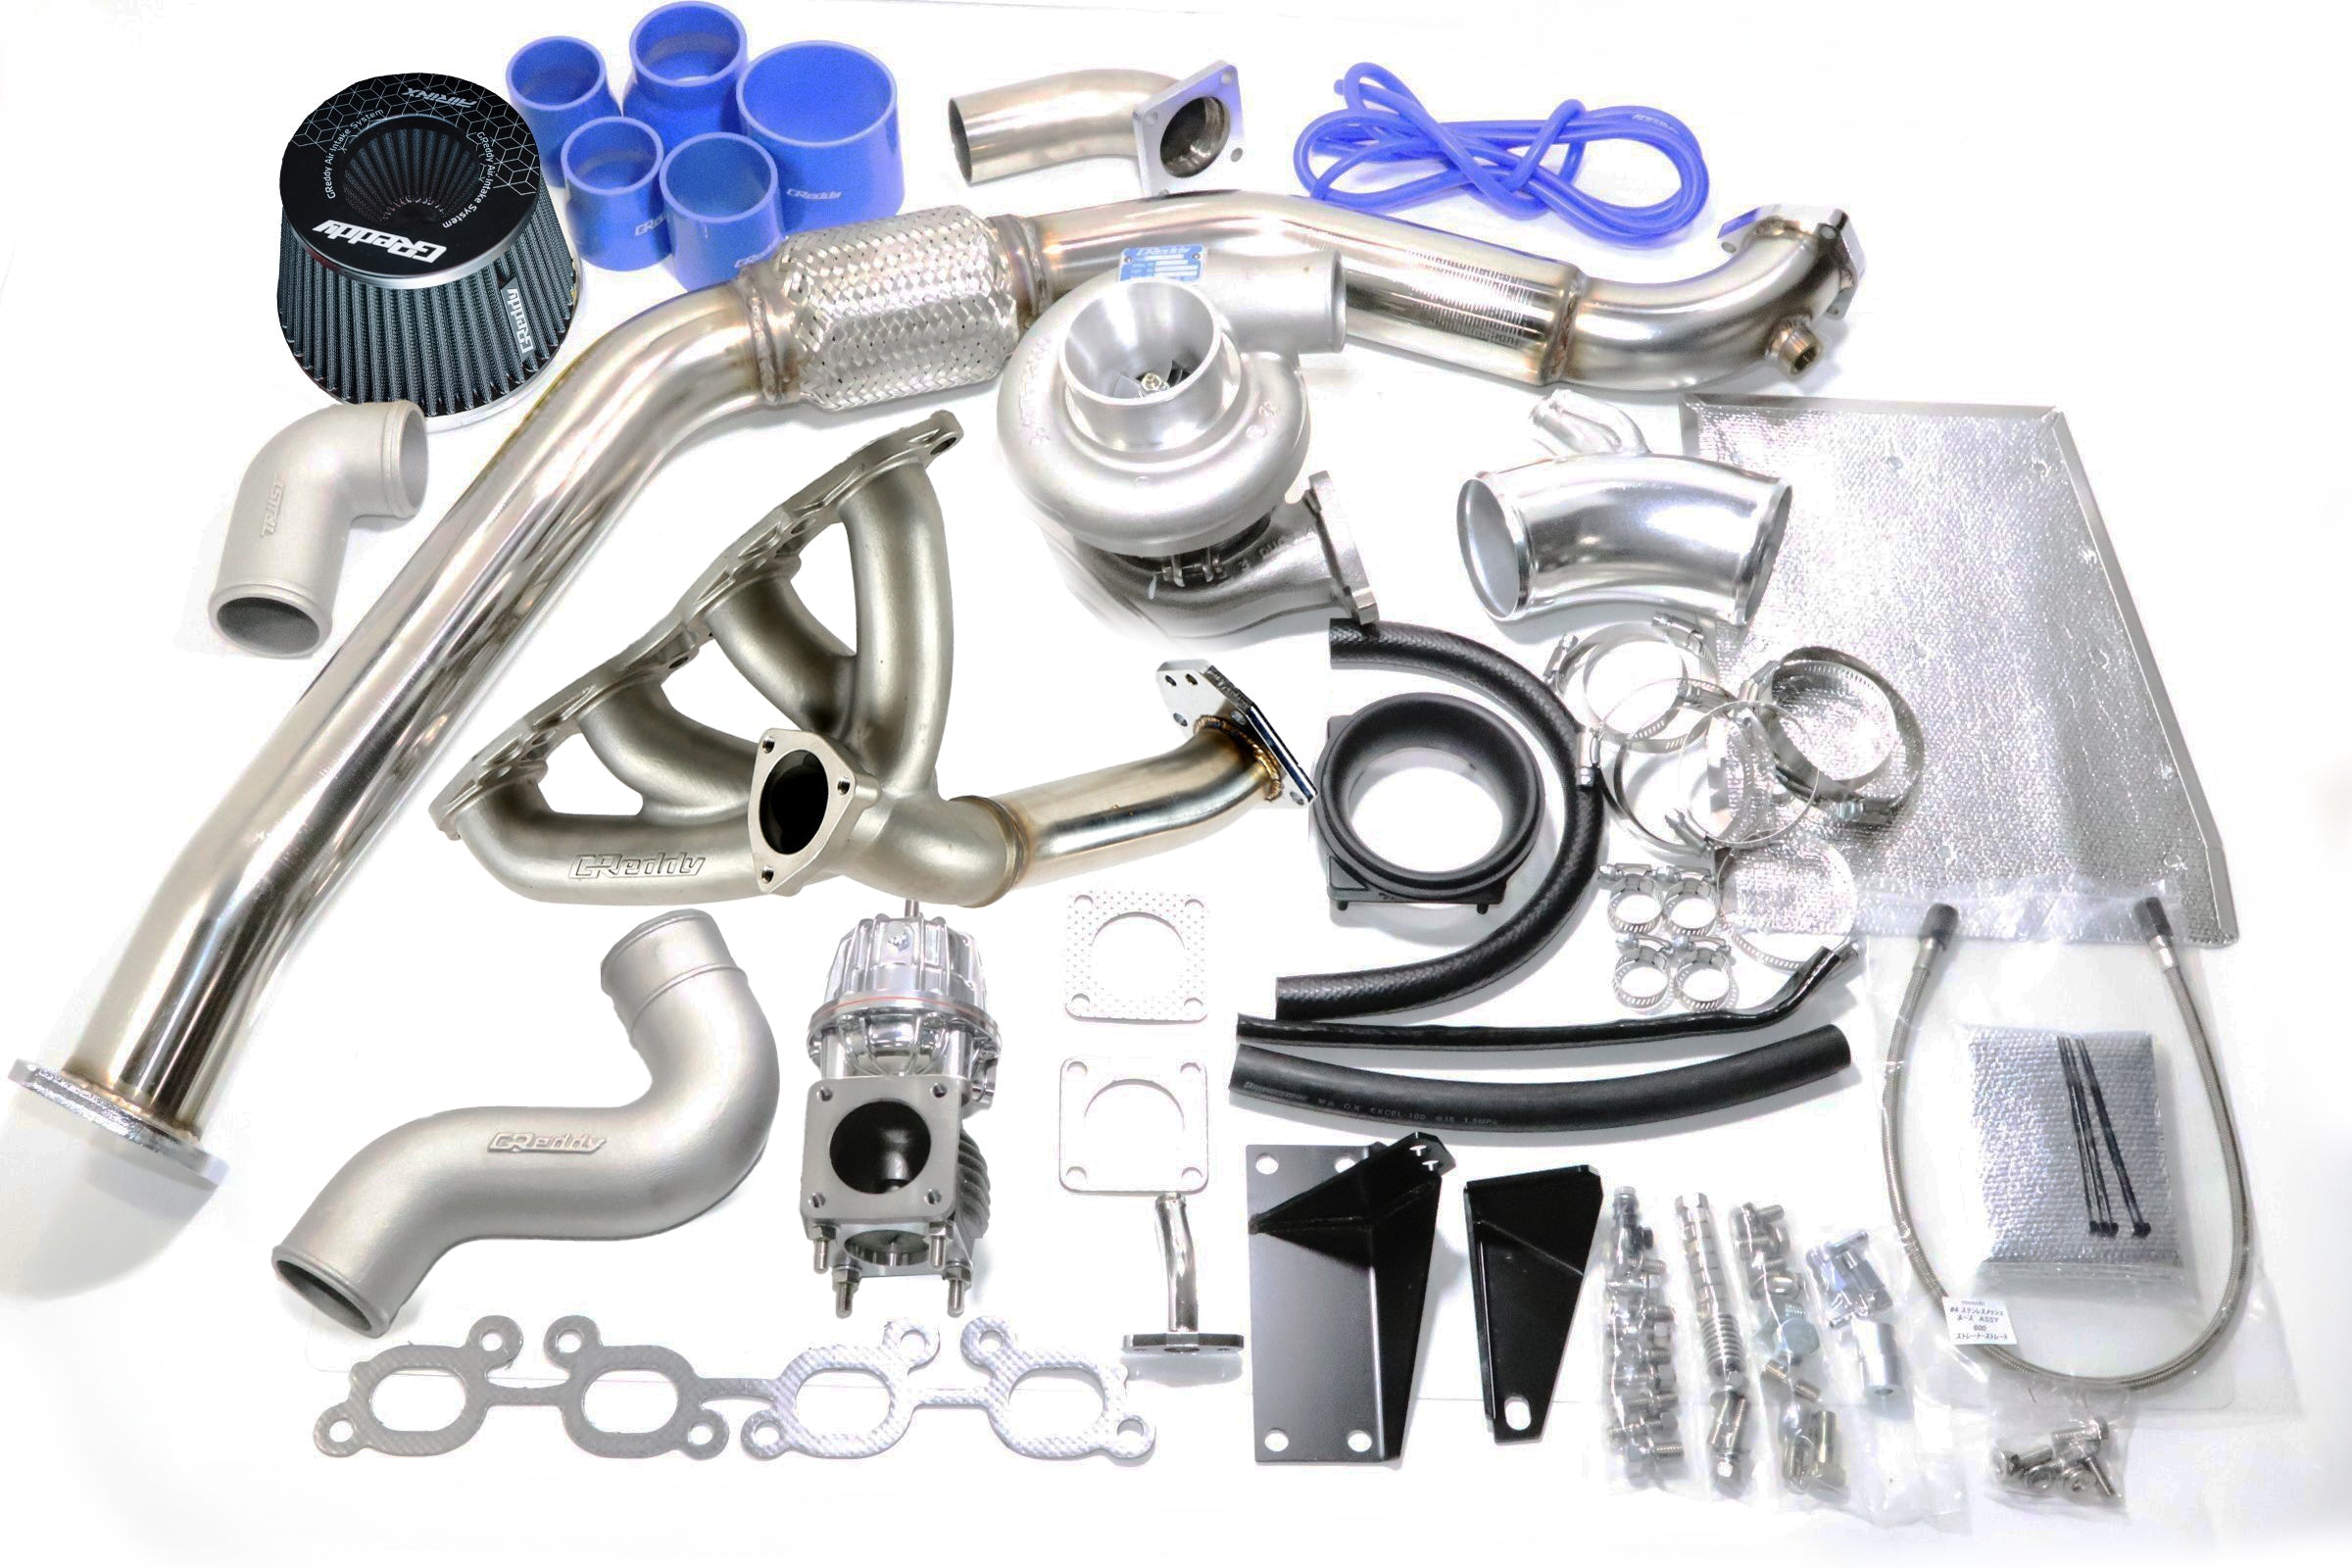 TURBO UPGRADE KIT (R)PS13 BEFORE M/C TD06 EXT W/G - (11520135 11520136 11520137 11520138 1120139)